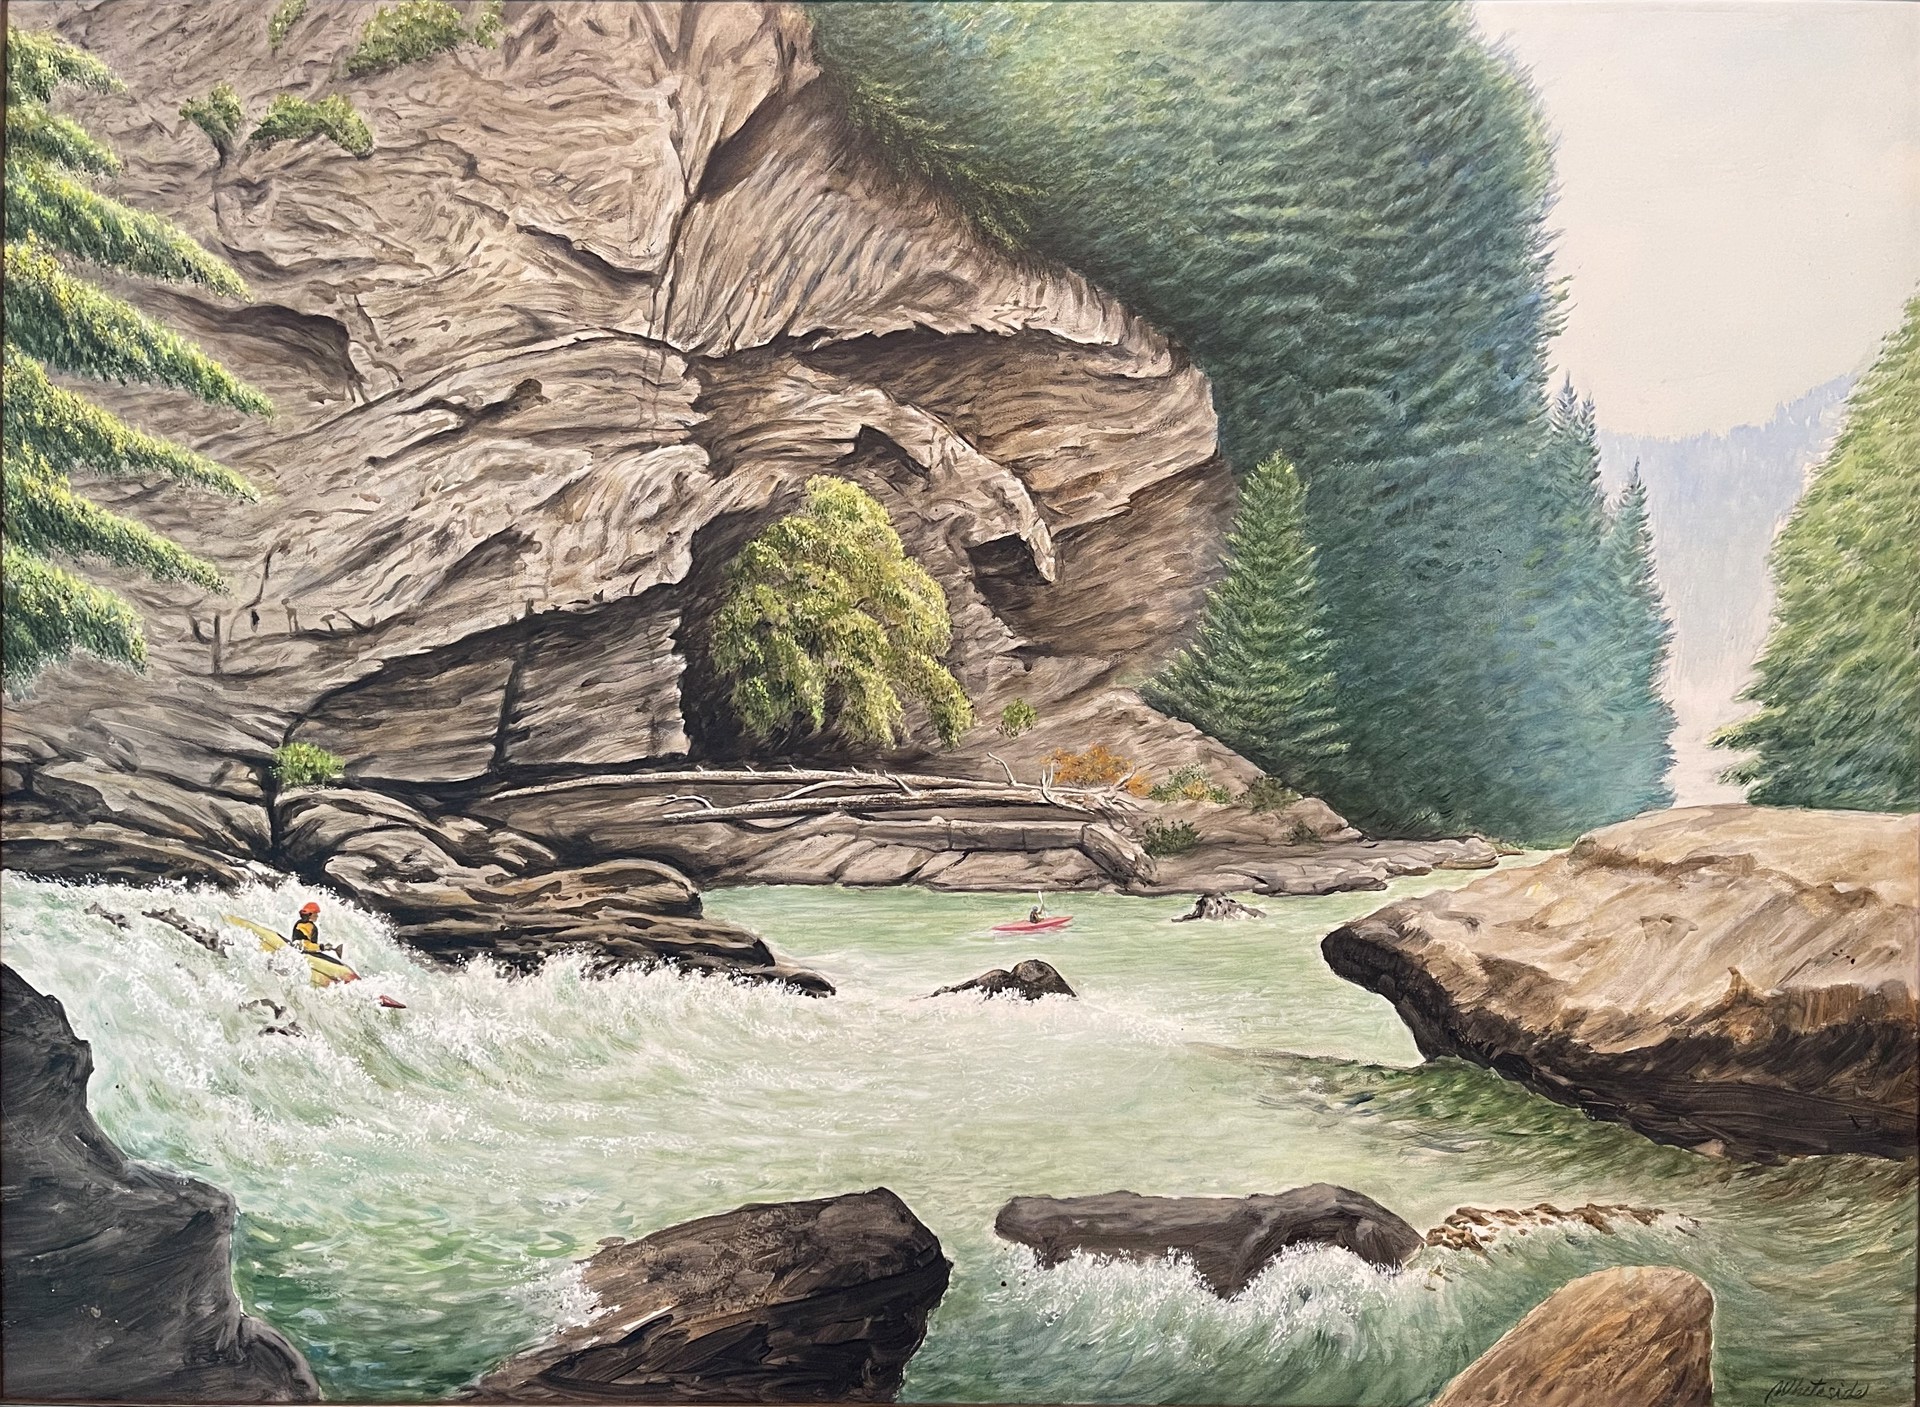 Raven Rock on the Chattooga River by William A. Whiteside